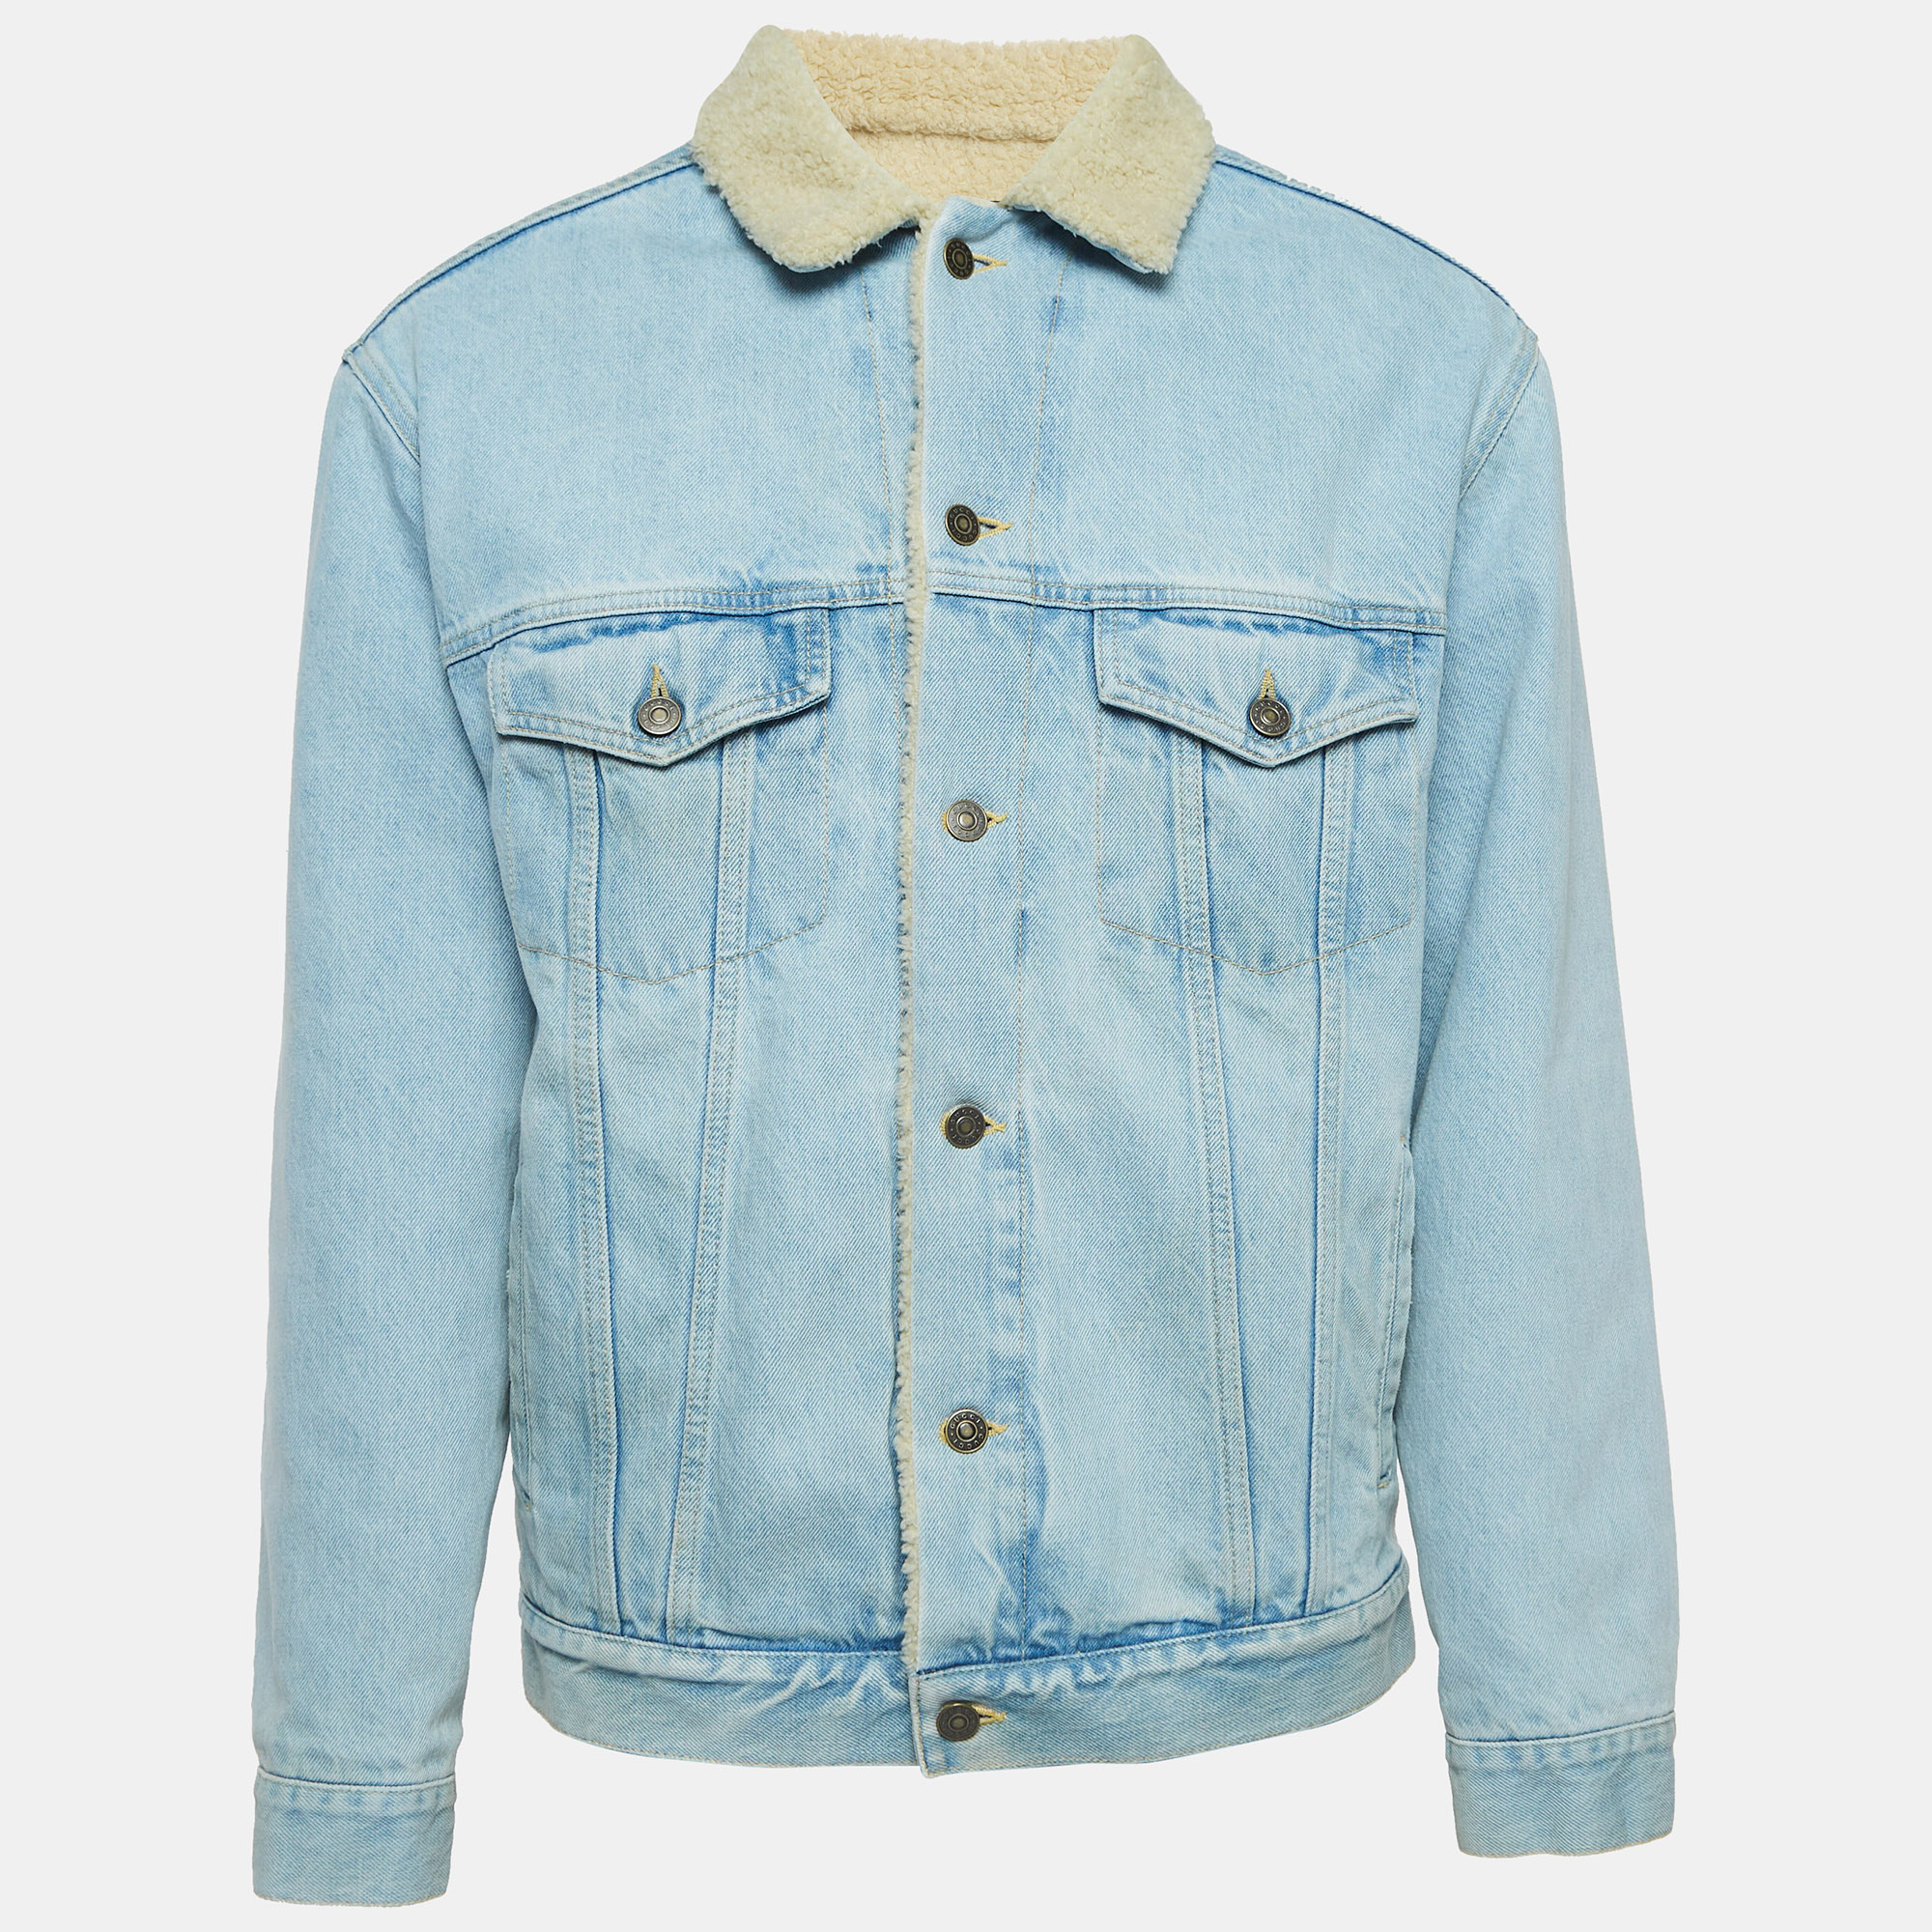 Gucci Blue Paramount Pictures Embroidered Denim Jacket S